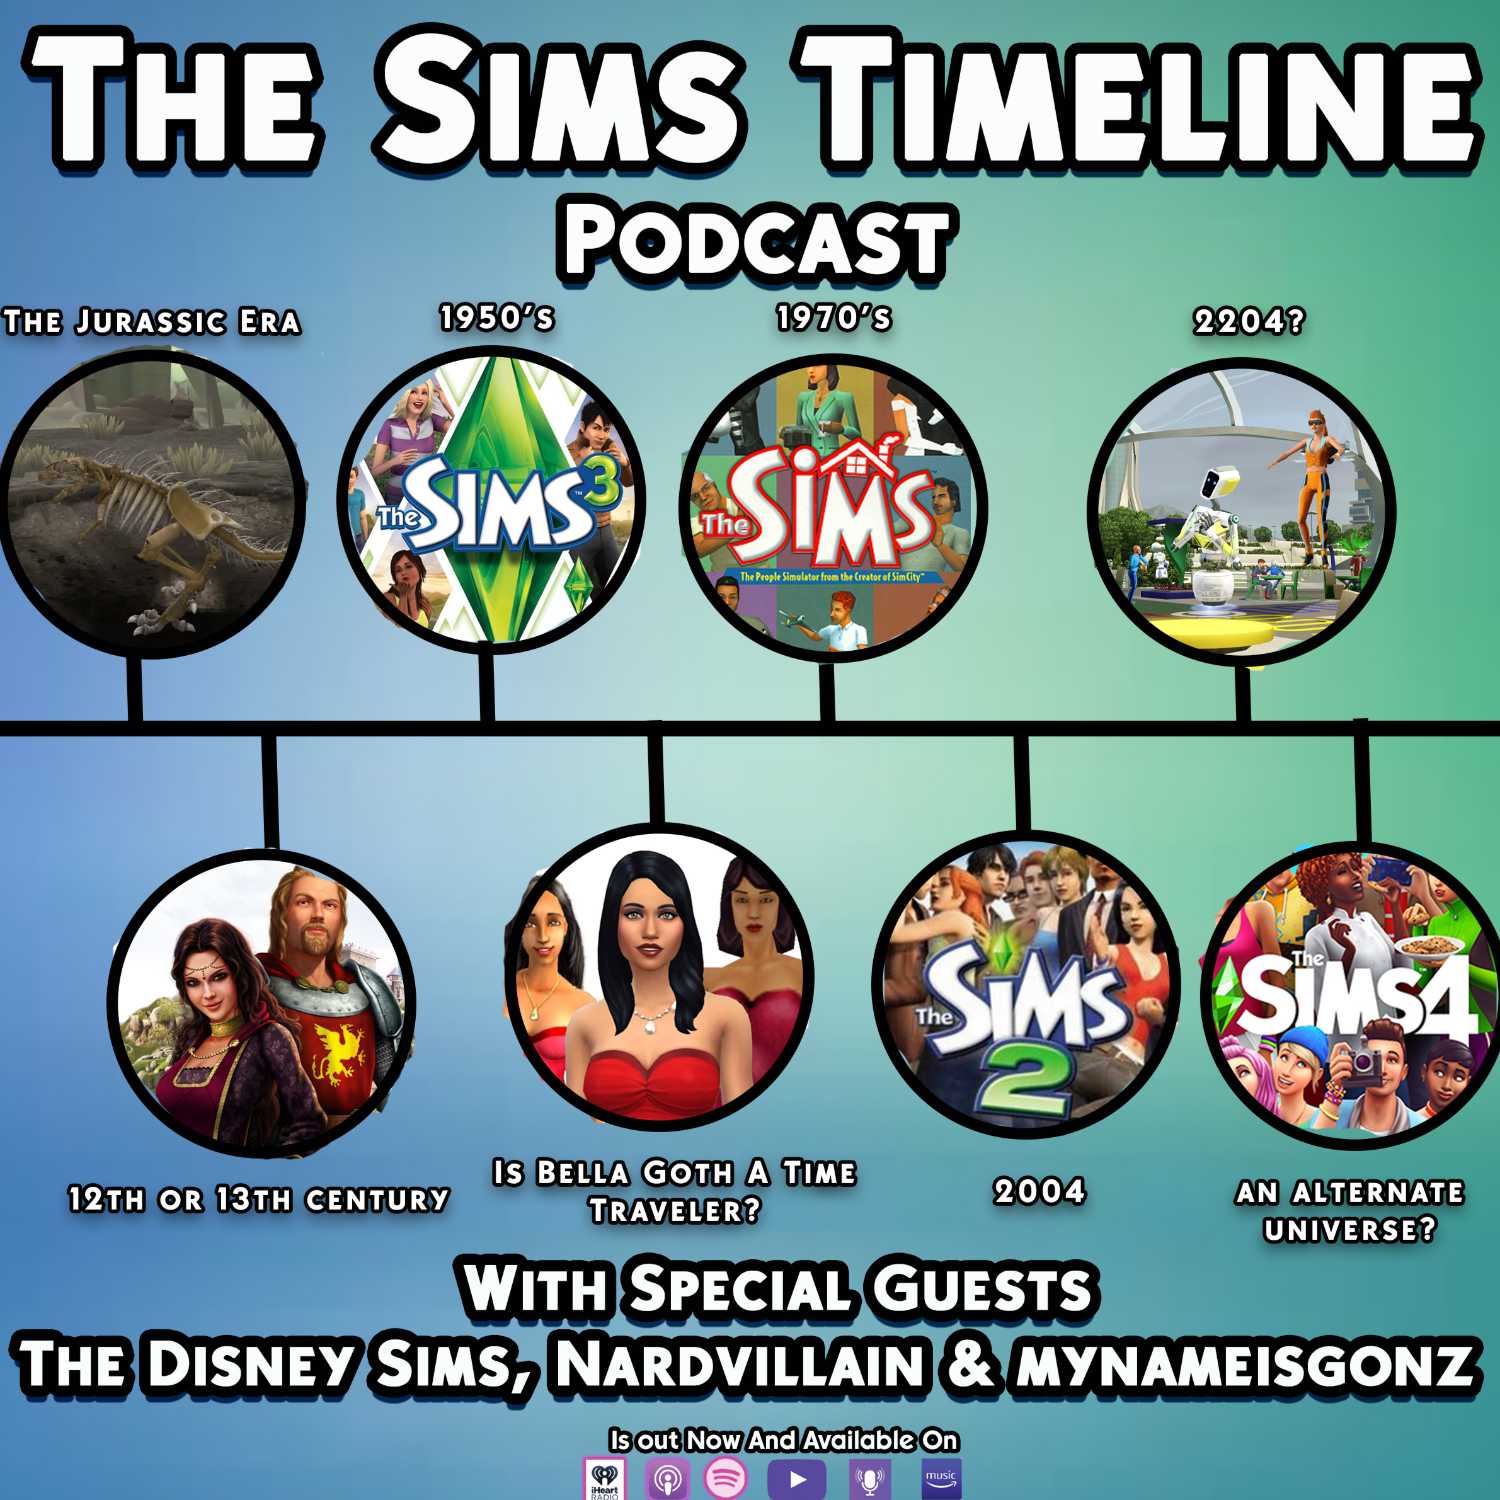 The Sims Timeline Podcast: With Special Guests The Disney Sims, Nardvillain & Mynameisgonz